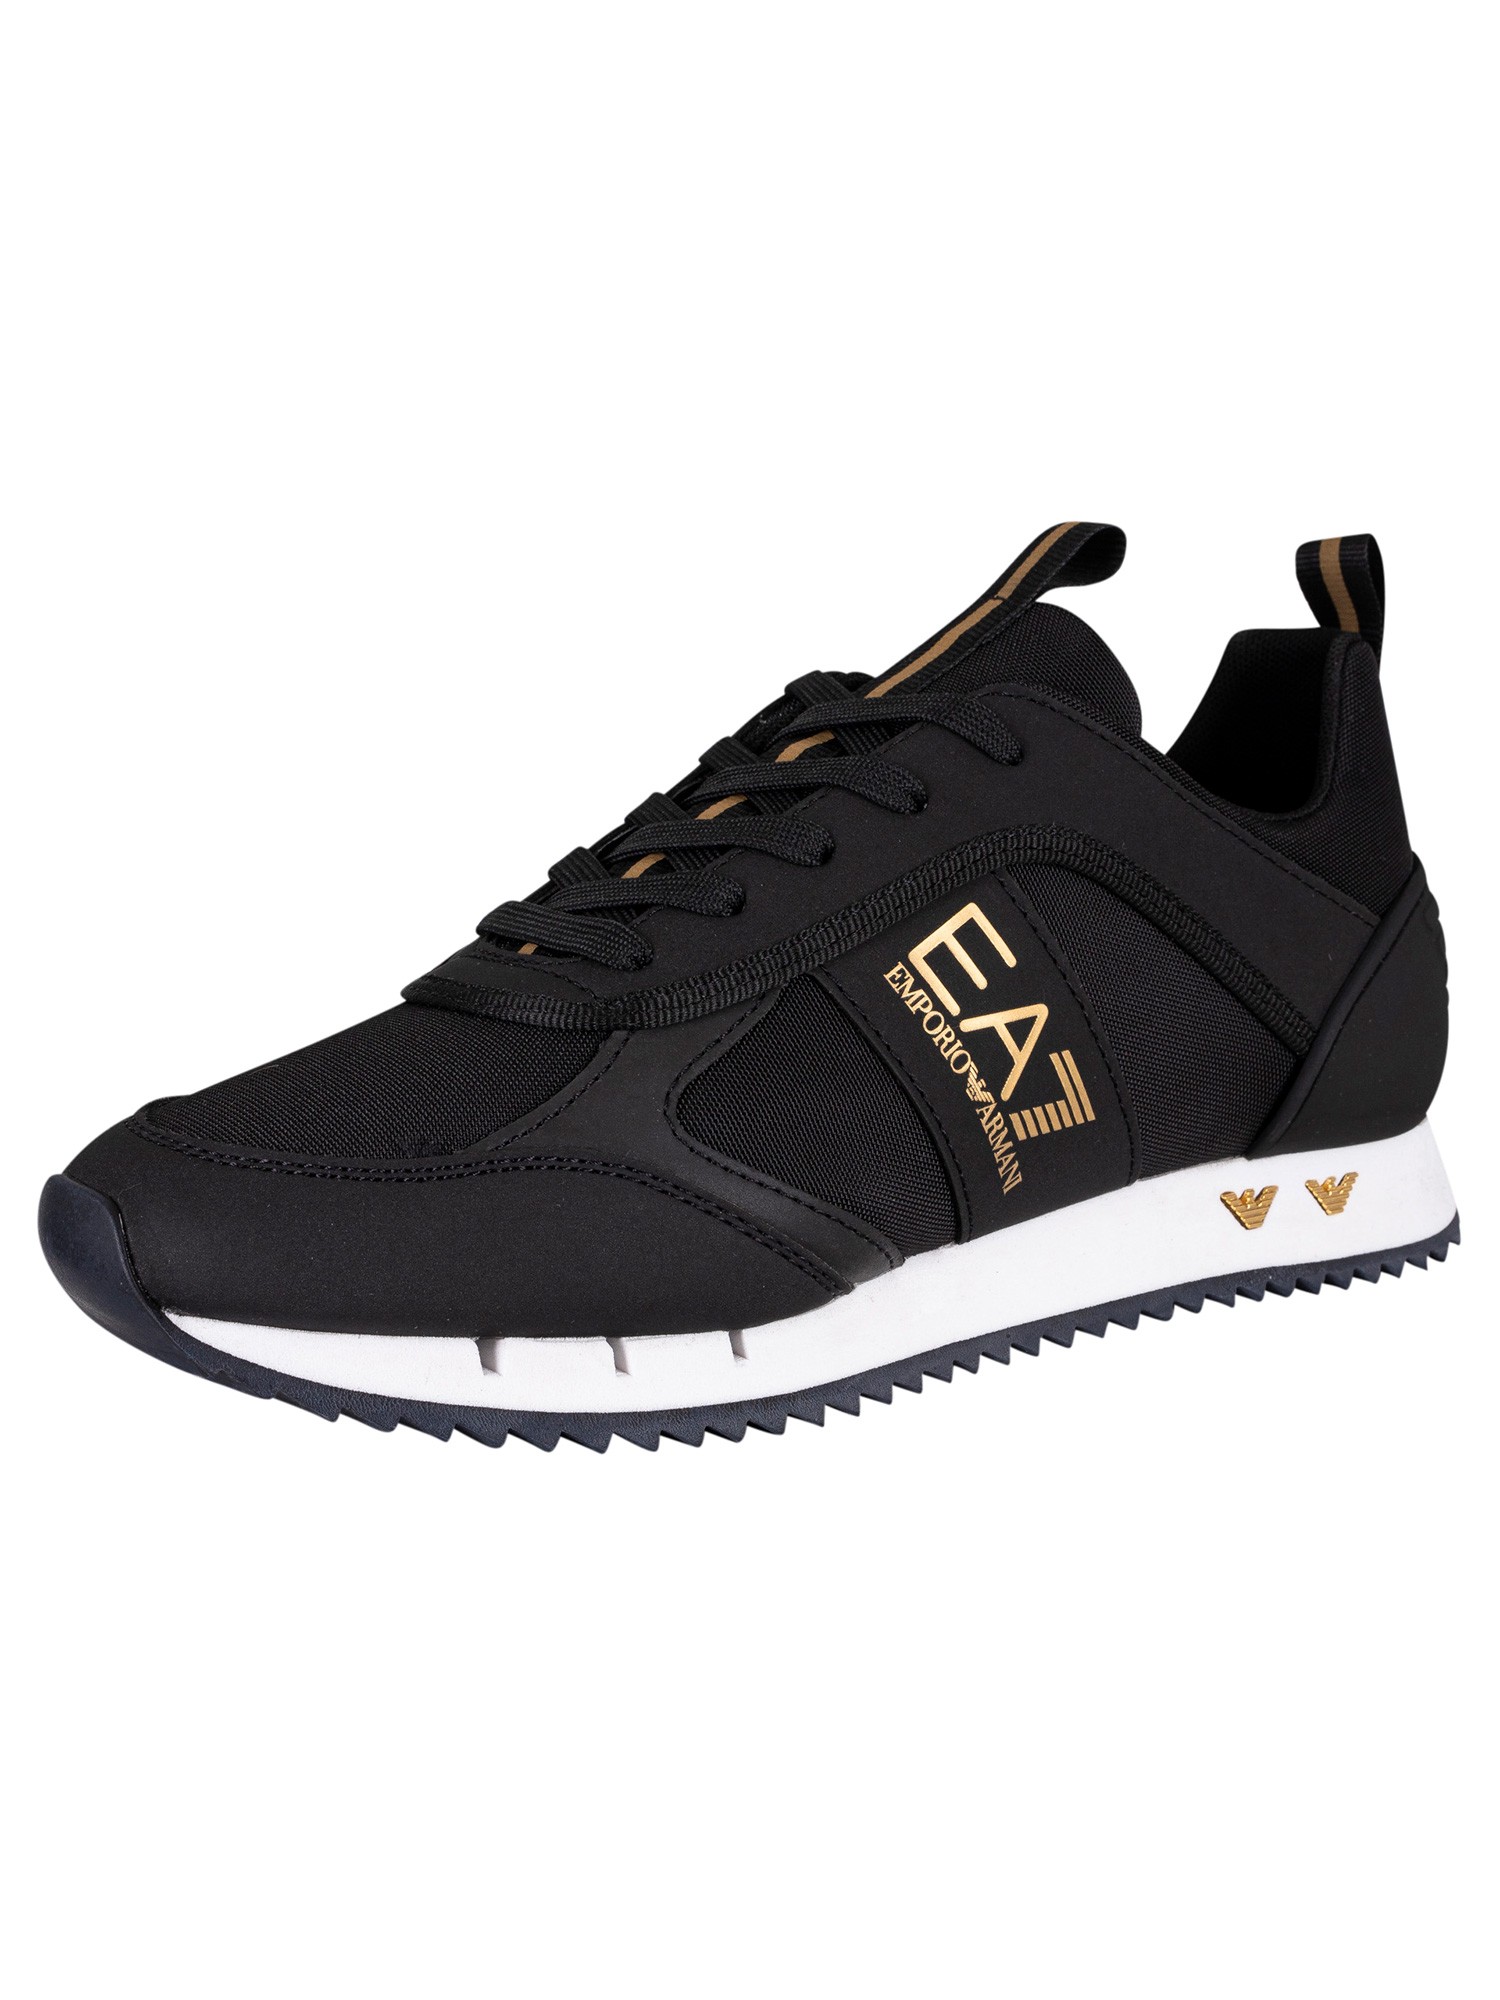 EA7 Side Logo Synthetic Trainers - Black/Gold | Standout